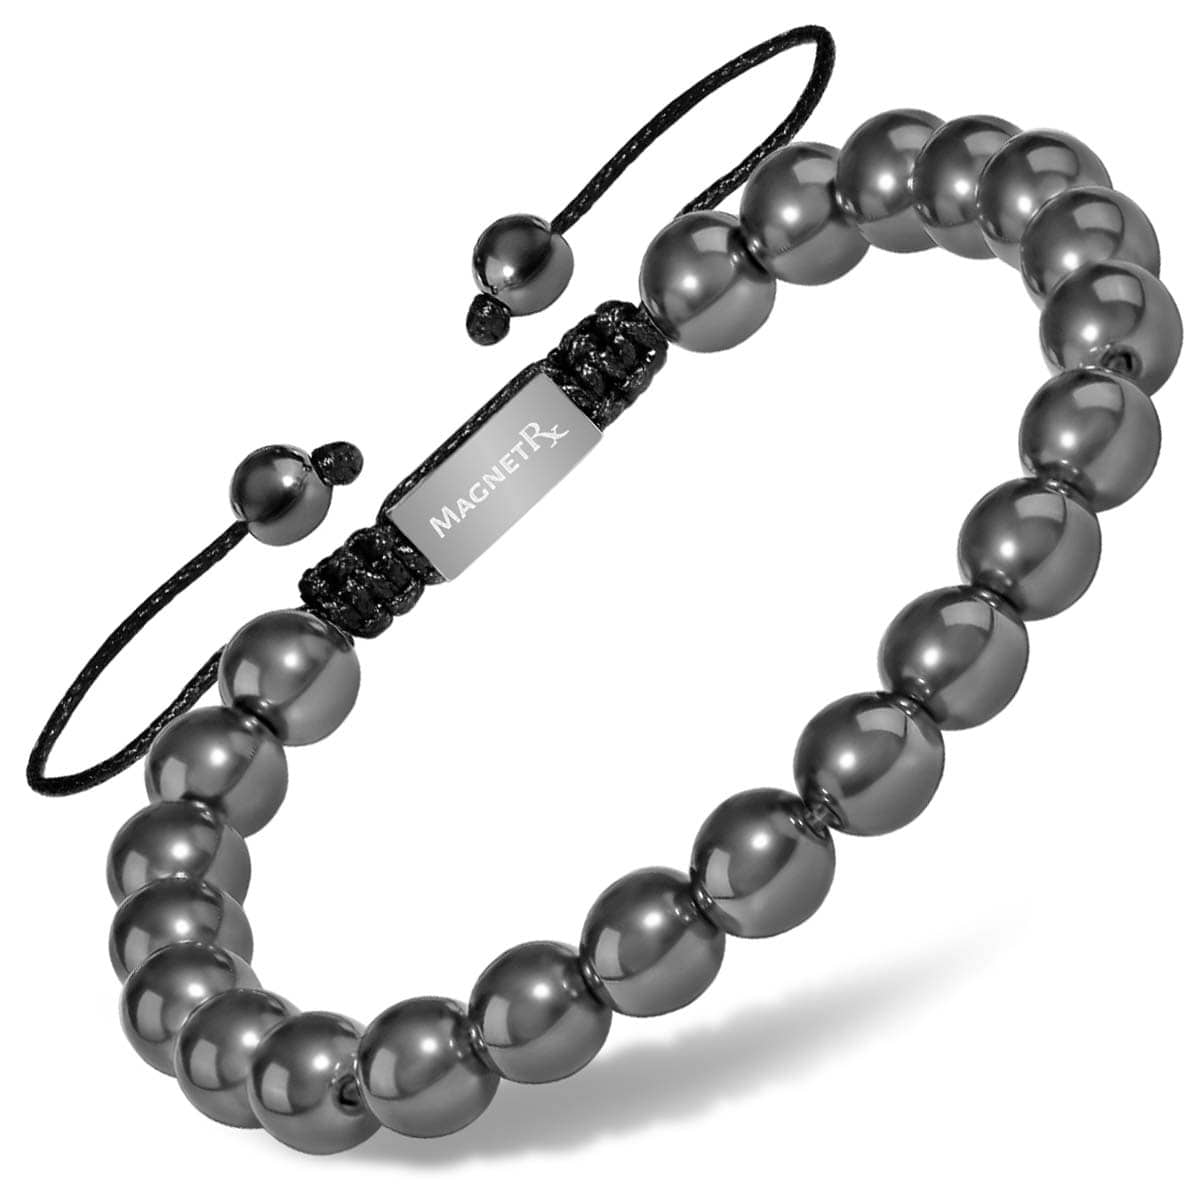 Buy Hematite 7-chakra Healing 8mm Bracelet Balance Destress Anti-anxiety  Magnetic Therapy Stone Online in India - Etsy